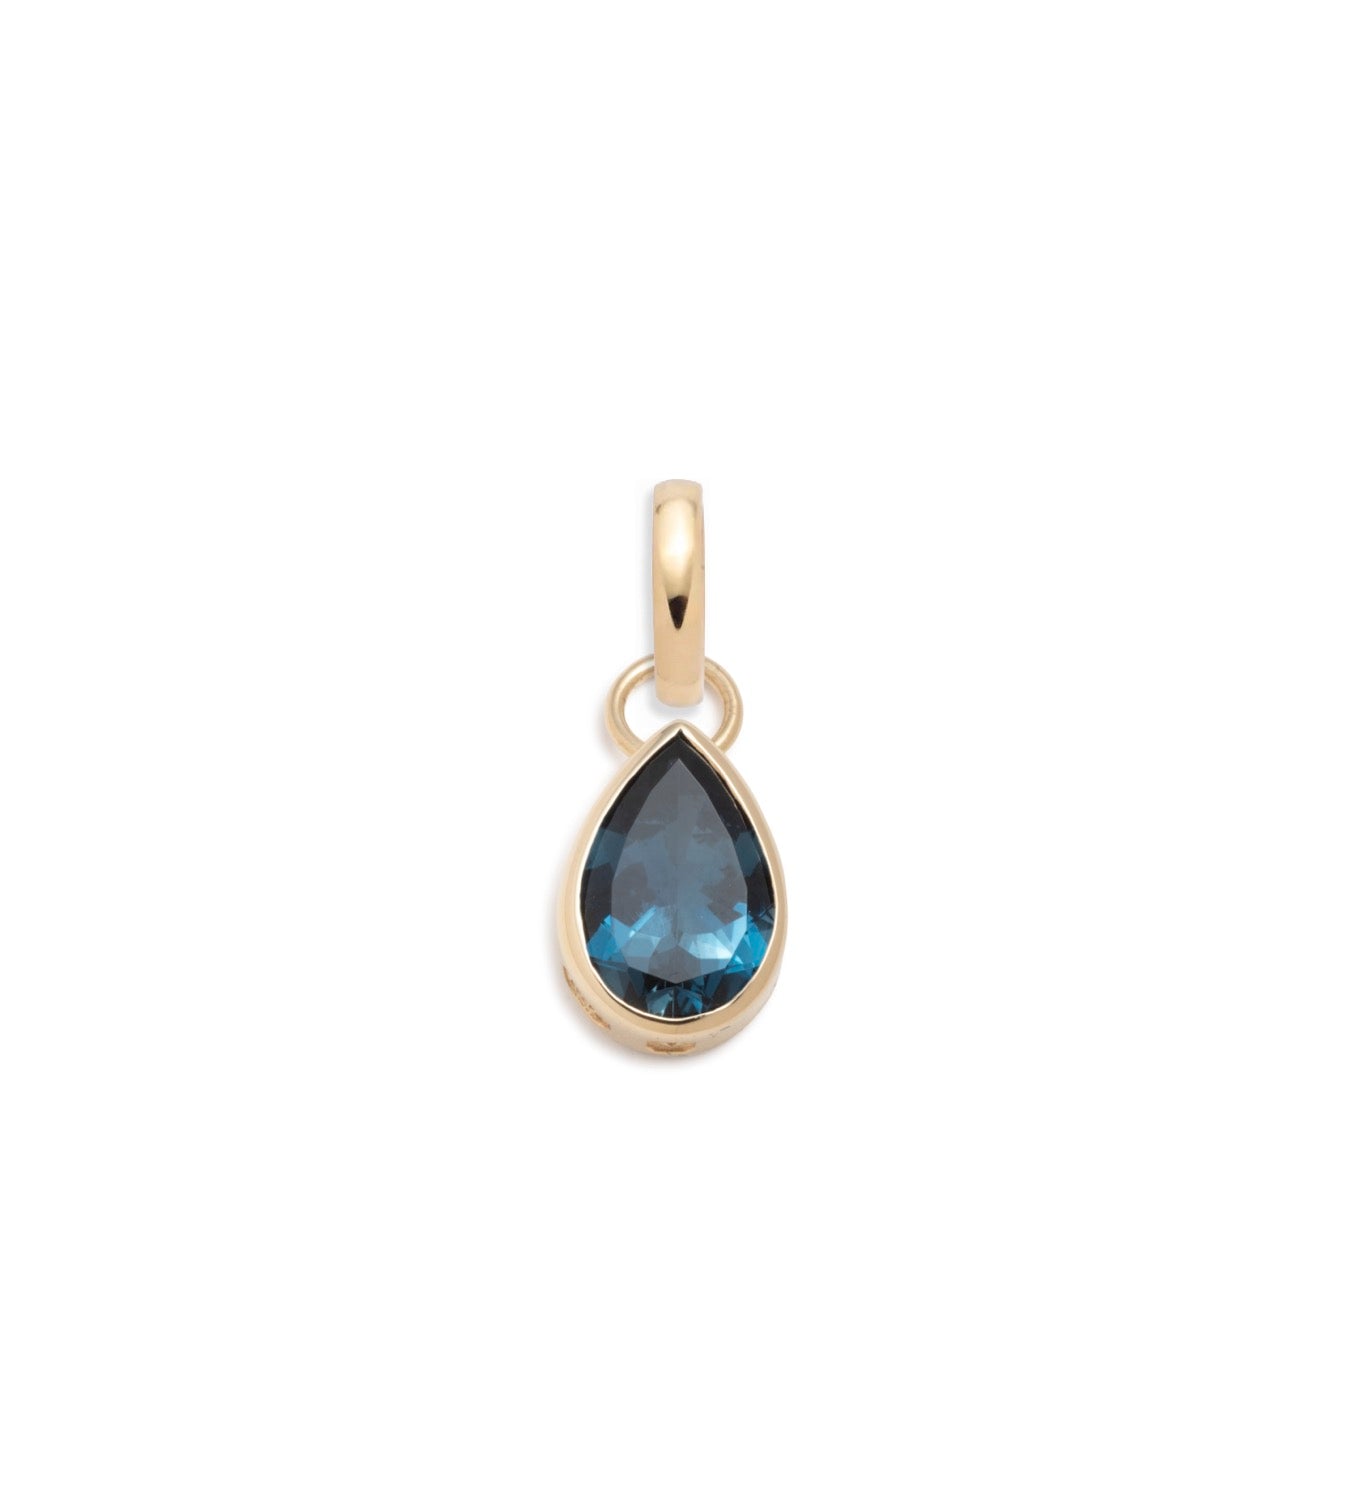 Forever & Always a Pair - Love : 4.3ct London Blue Topaz Pear Pendant with Oval Pushgate